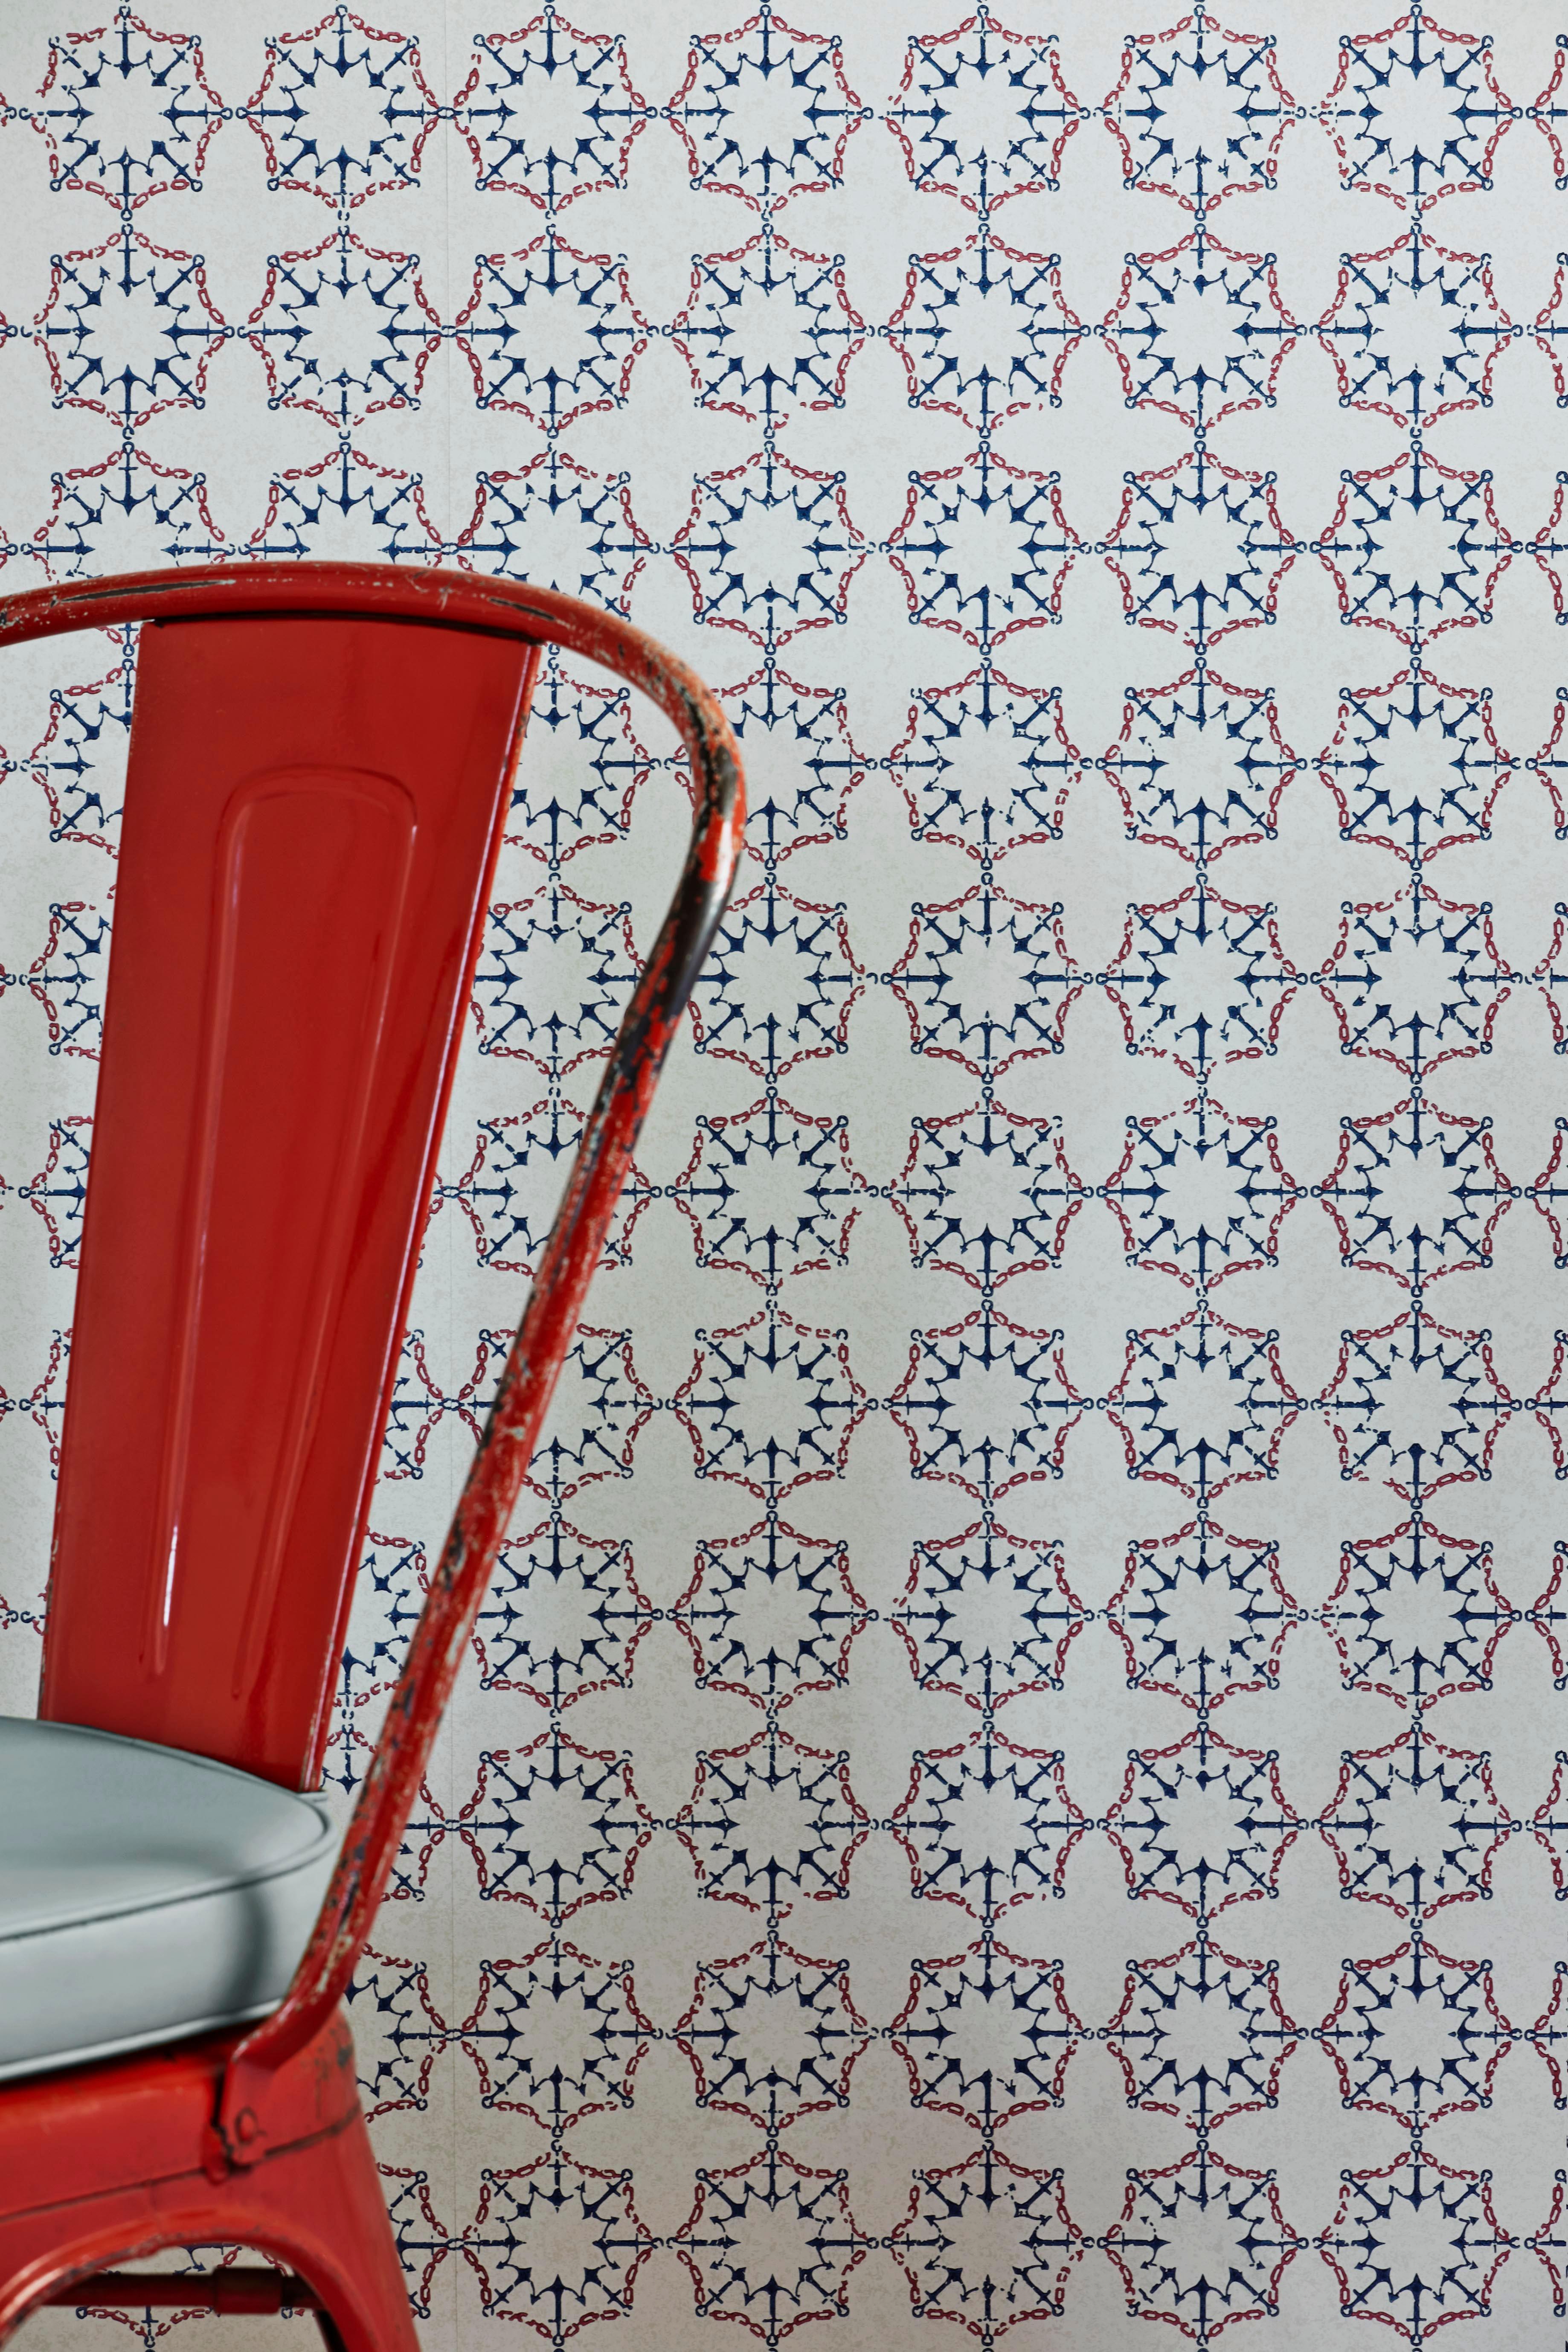 'Anchor Tile' Contemporary, Traditional Wallpaper in Red/White/Blue In New Condition For Sale In Pewsey, Wiltshire